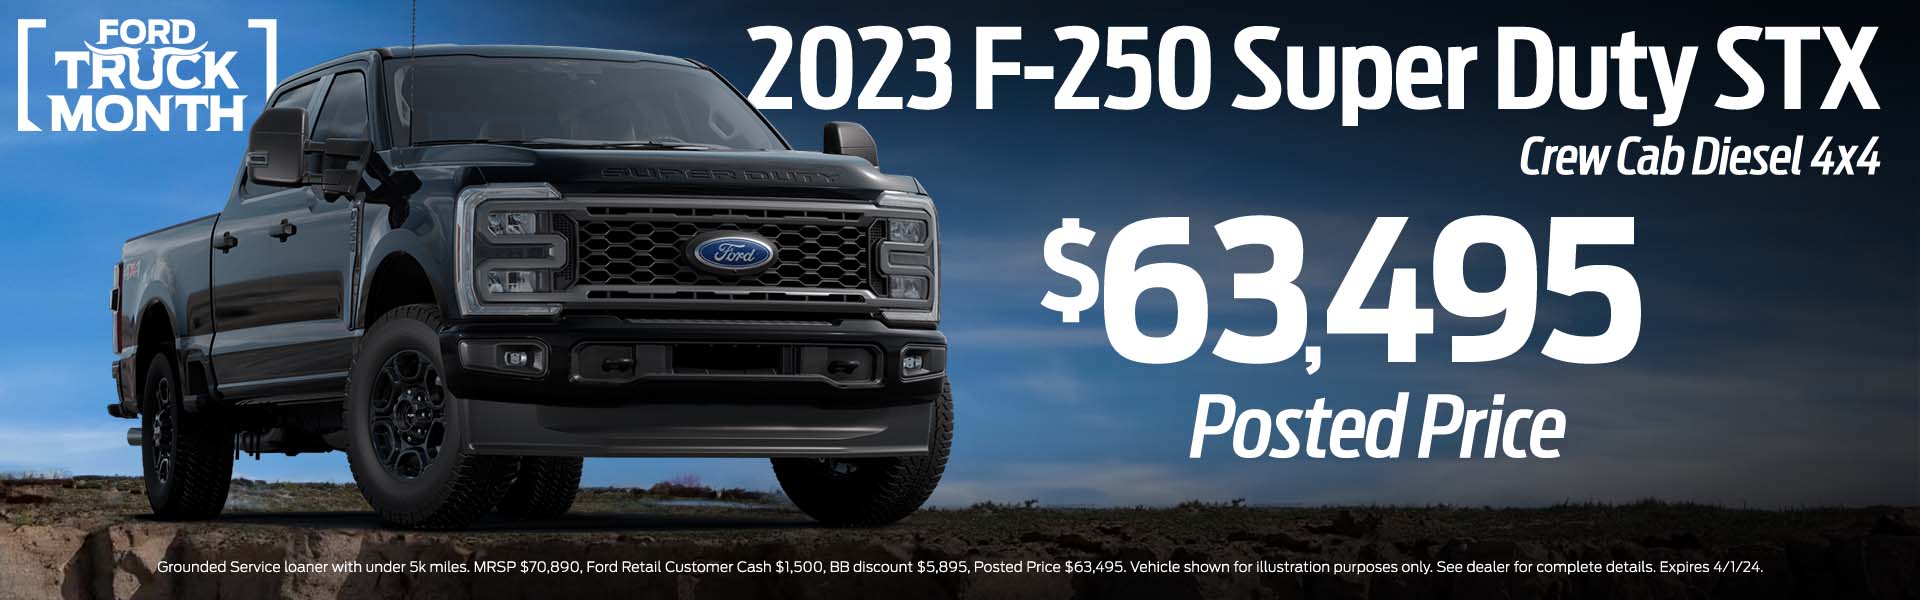 2023 F-250 Super Duty Diesel $64,995 posted price